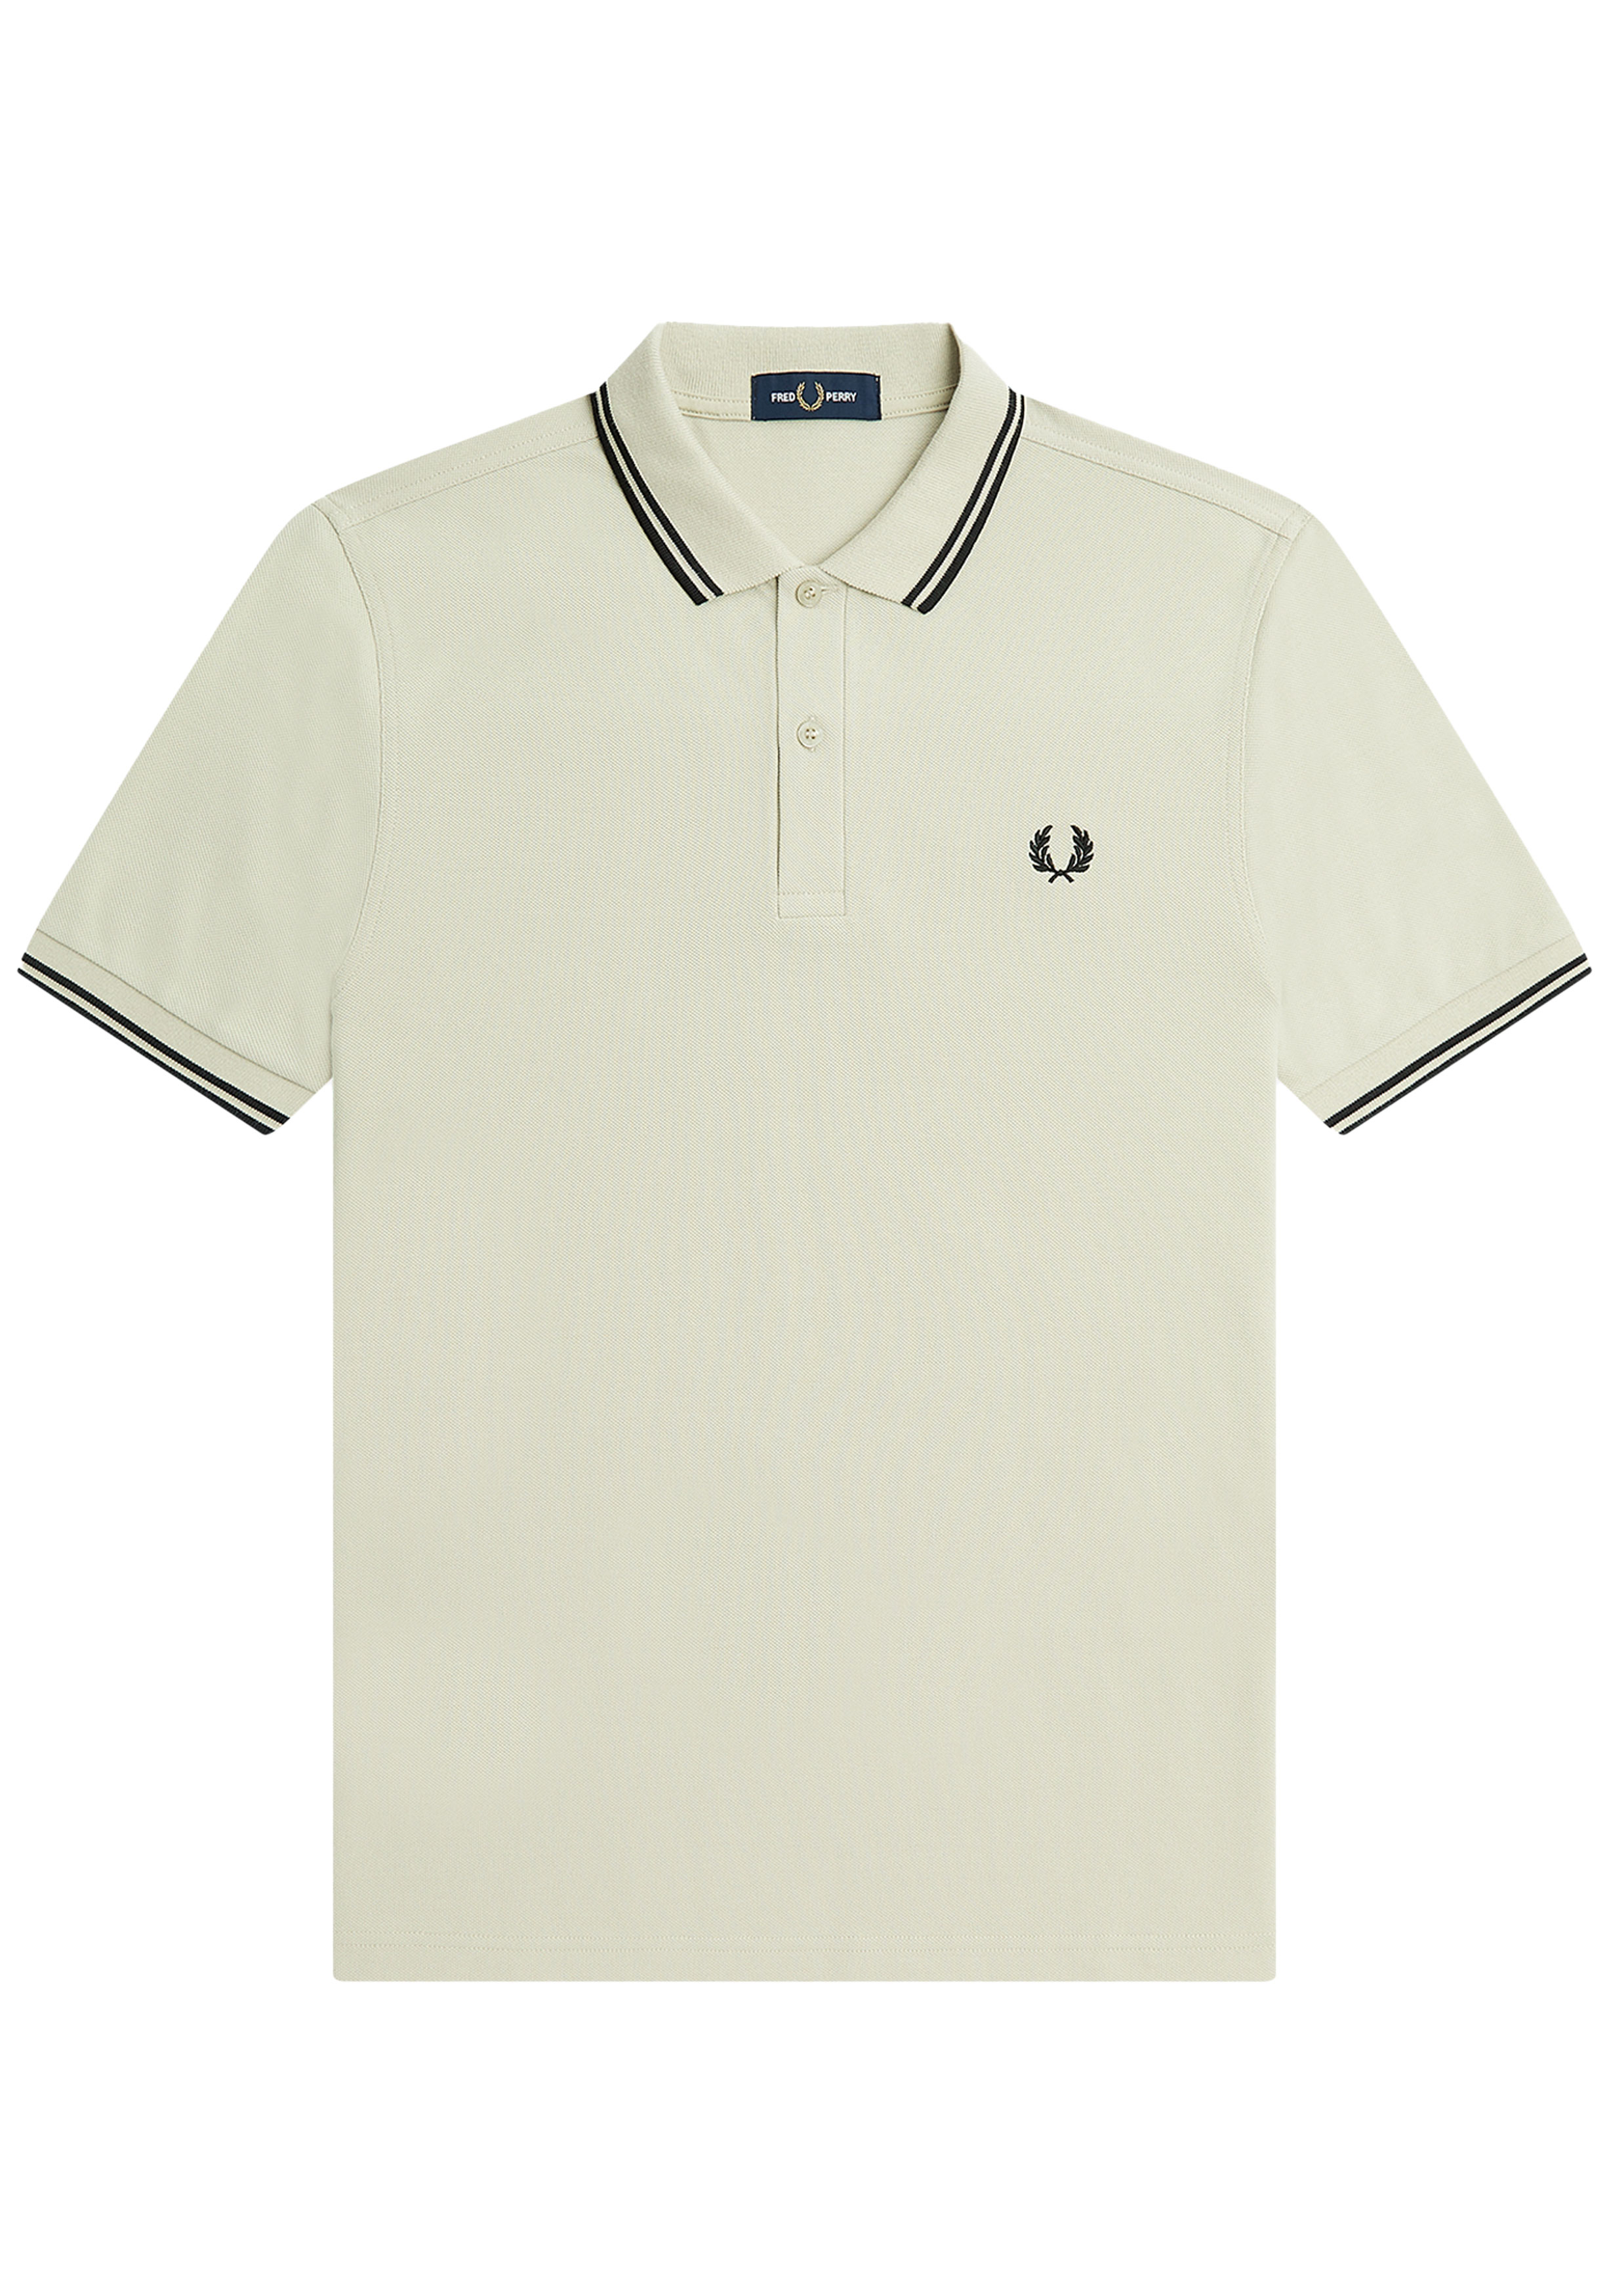 Fred Perry M3600 polo twin tipped shirt, pique, Light Oyster / Black / Black